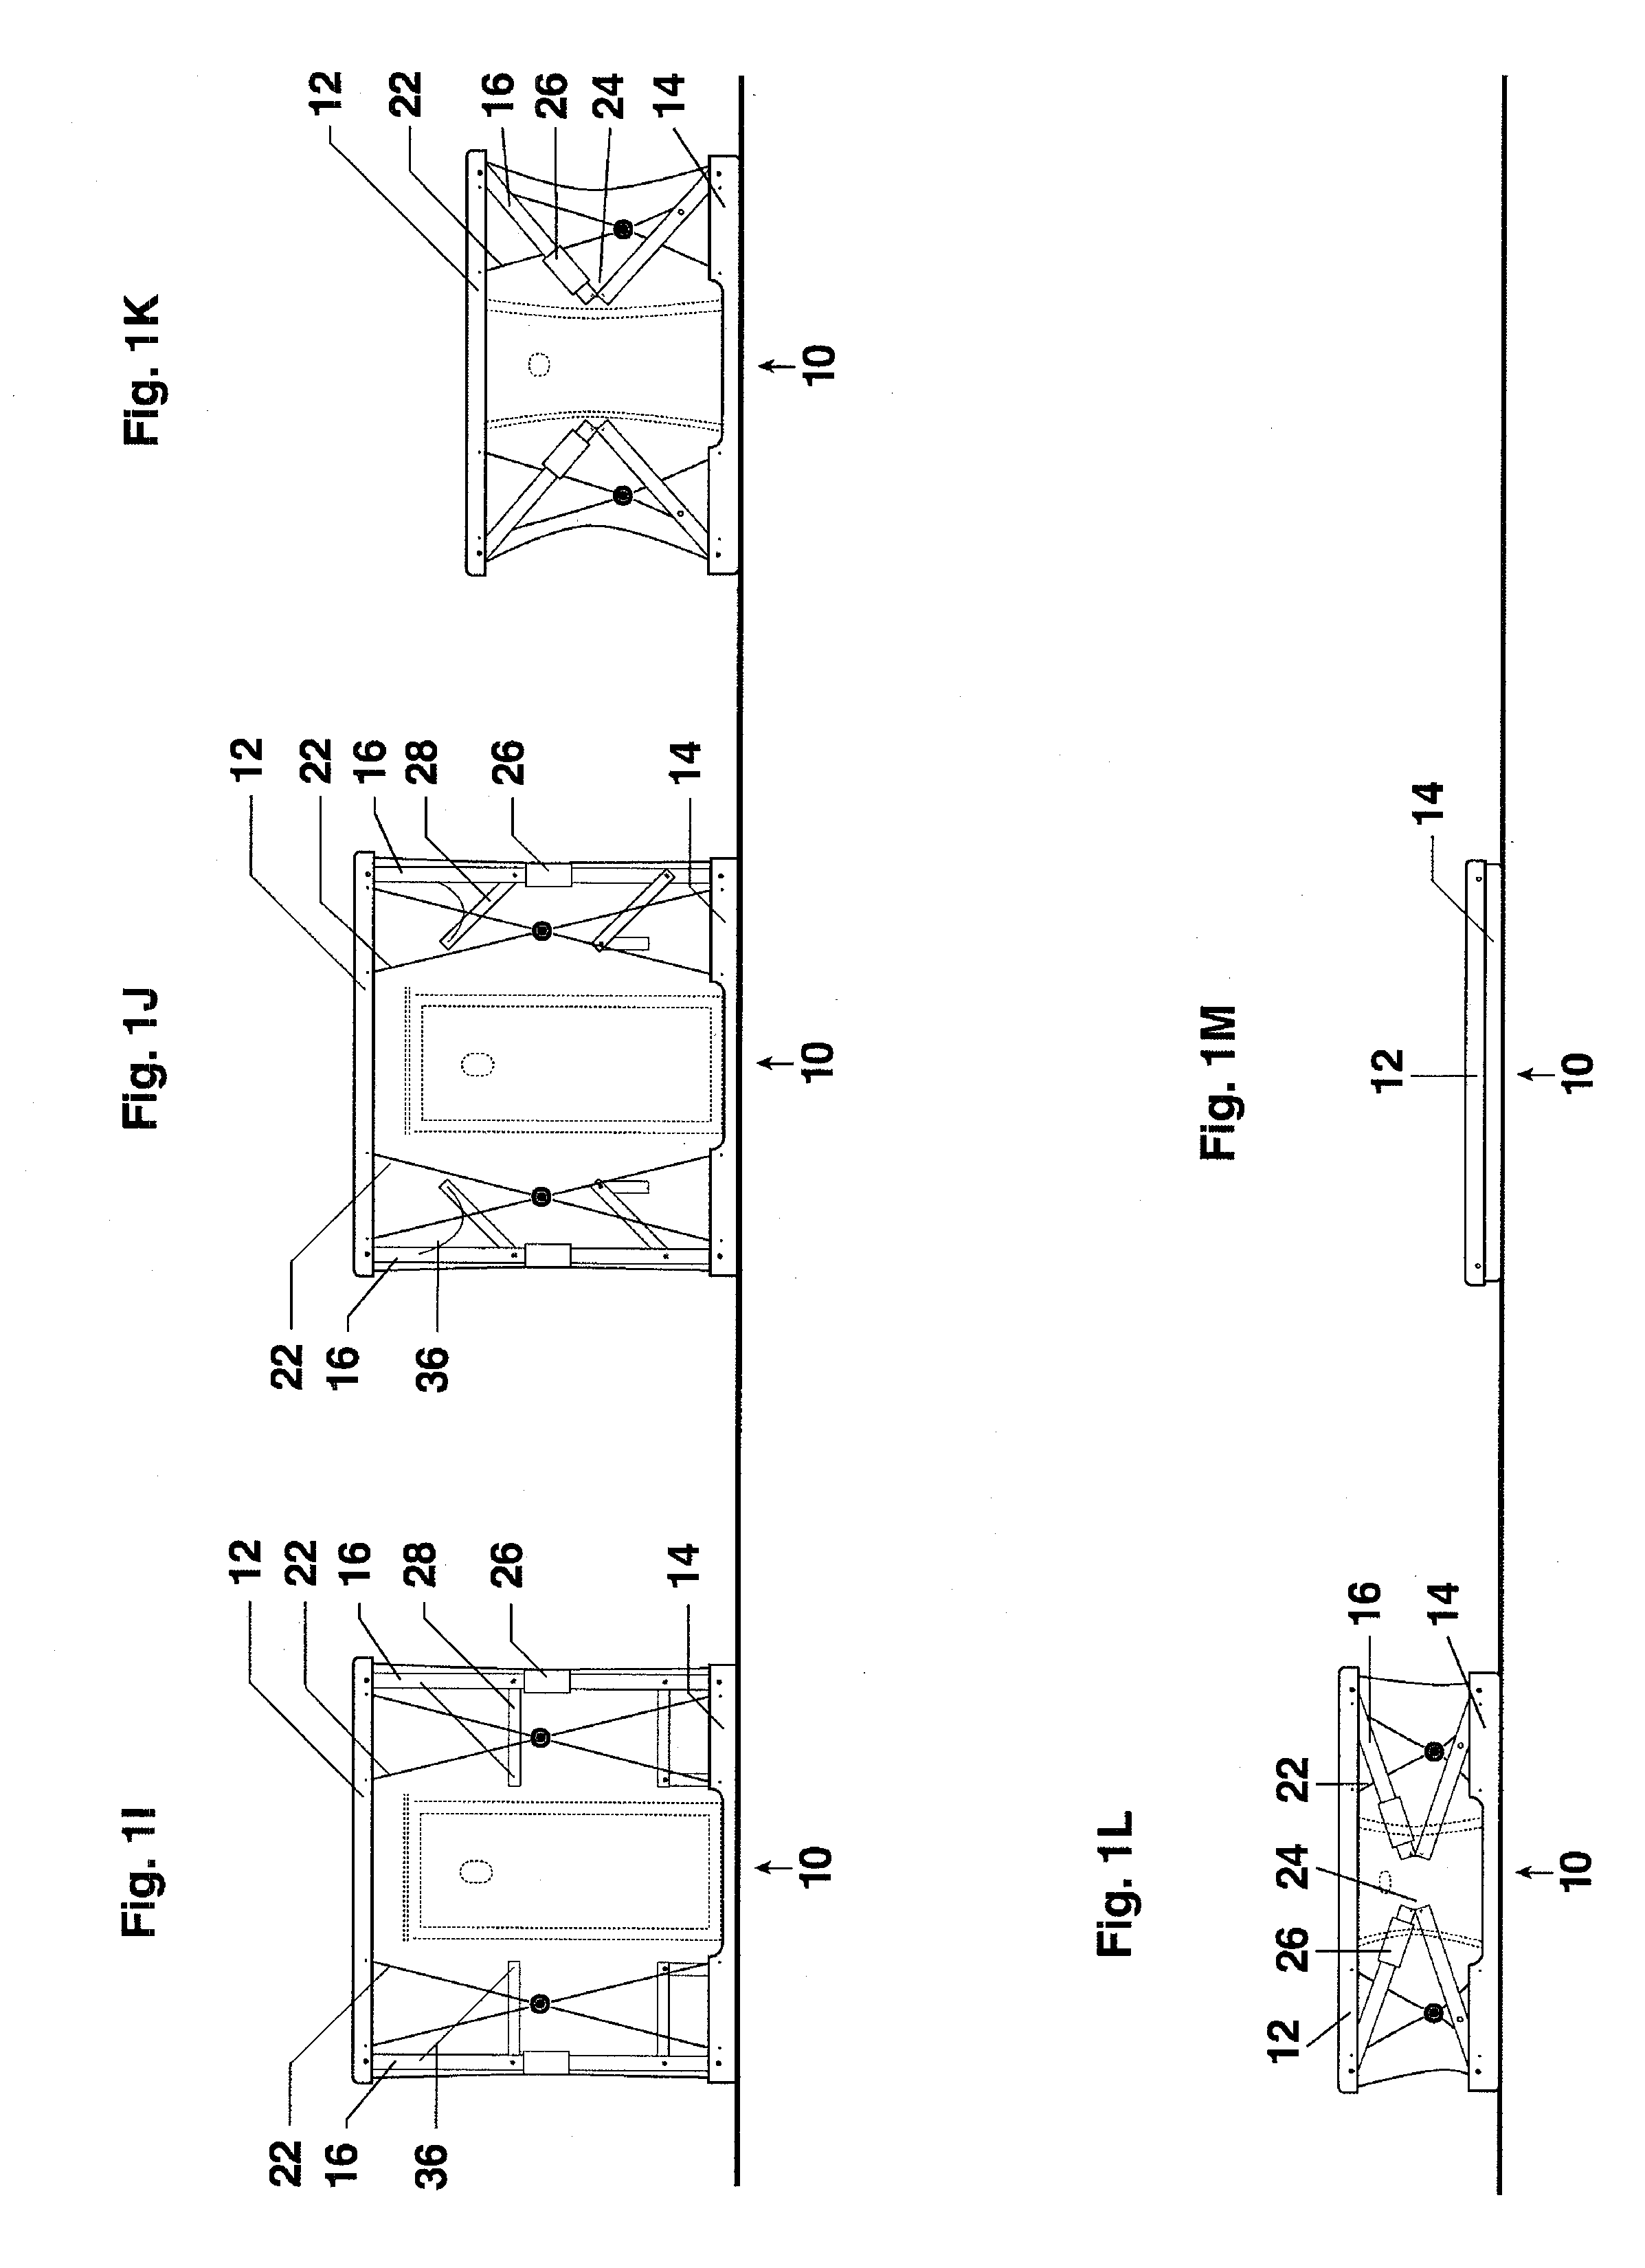 Portable shelters, related shelter systems, and methods of their deployment